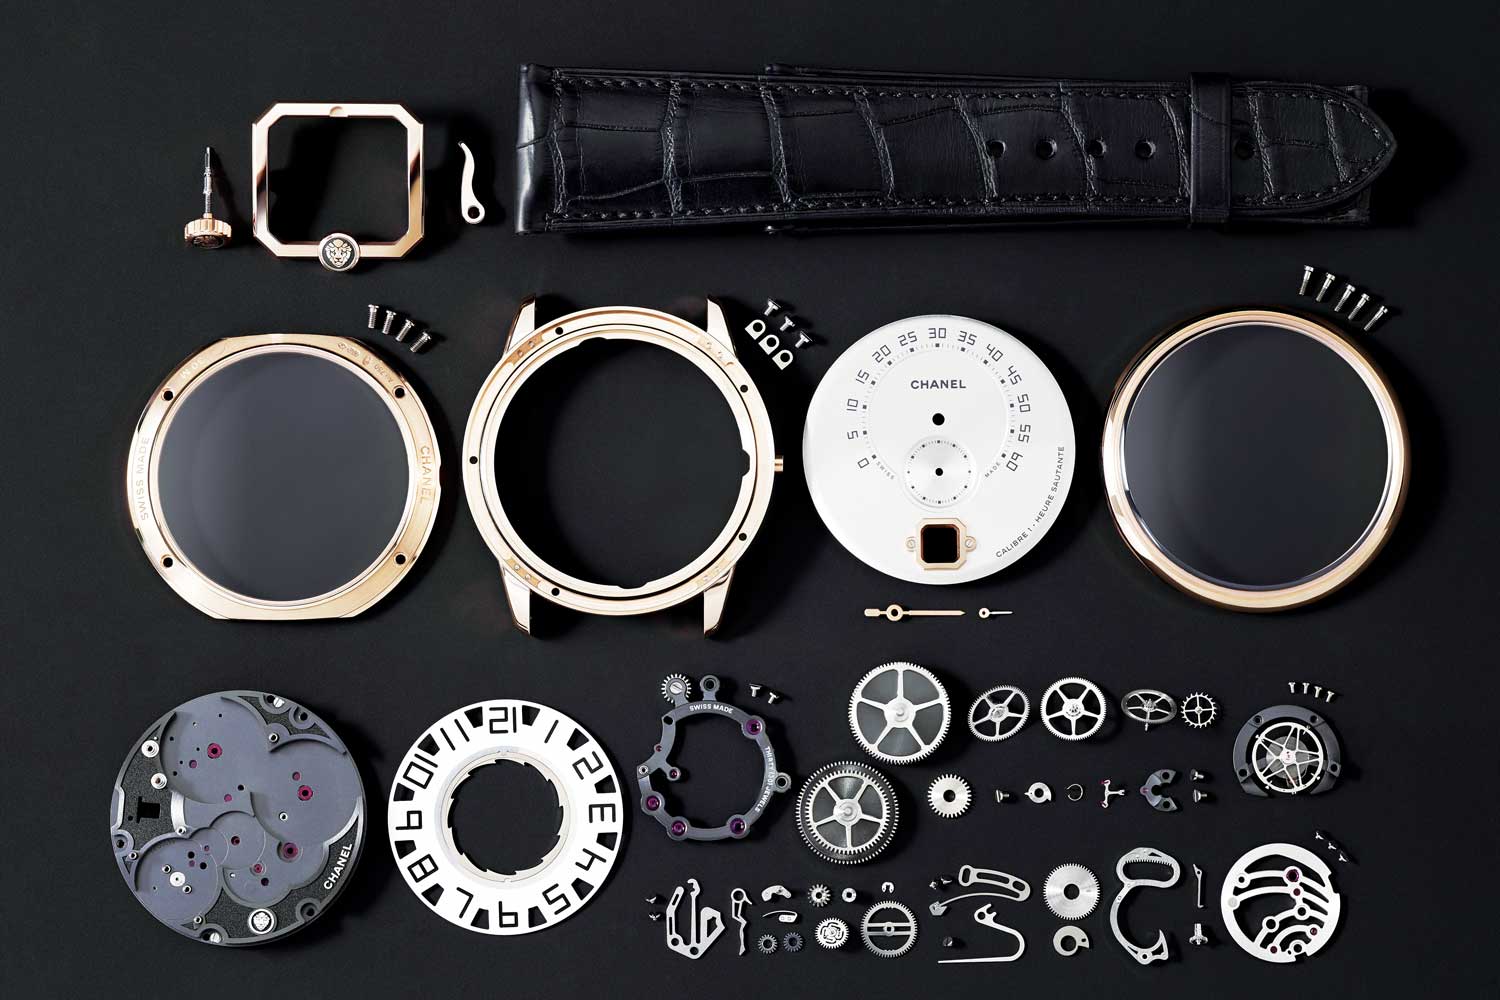 The parts that make up one of Chanel’s greatest hits, the Monsieur de Chanel. Notice that there is no additional plate apart from the mainplate, as the jumping hour and retrograde minutes complication is integrated in the movement